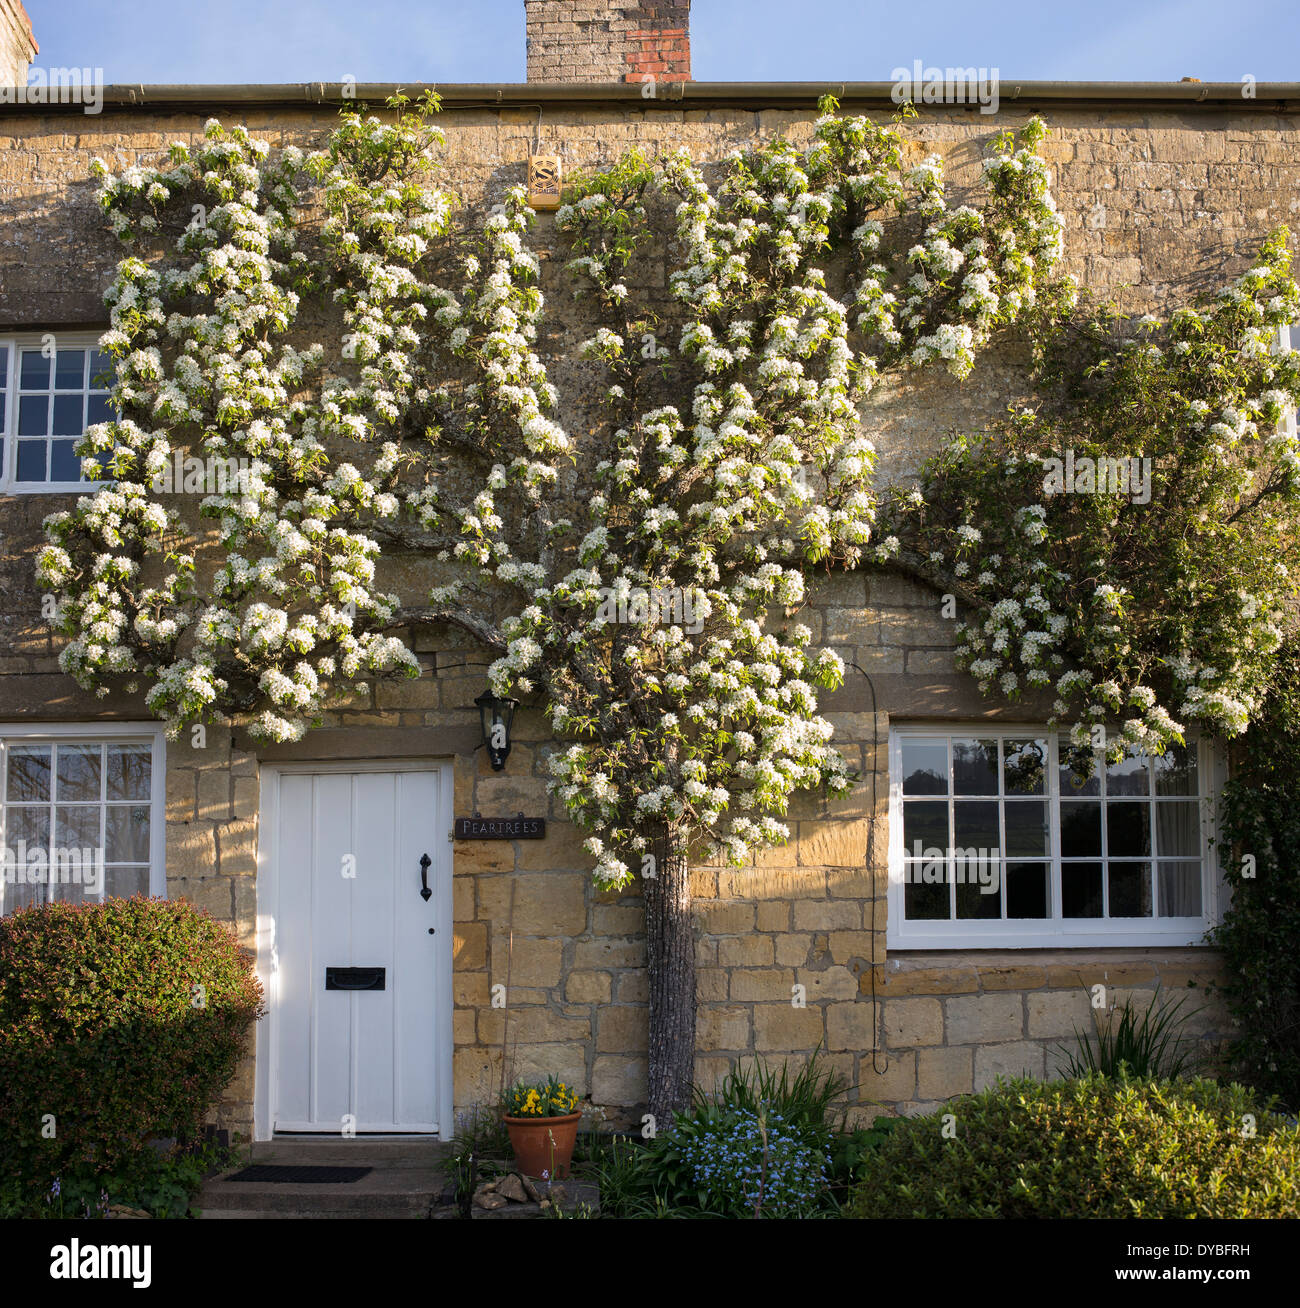 Fan trained Pear tree in blossom on a cottage in the village of Blockley, Cotswolds, Gloucestershire, England Stock Photo